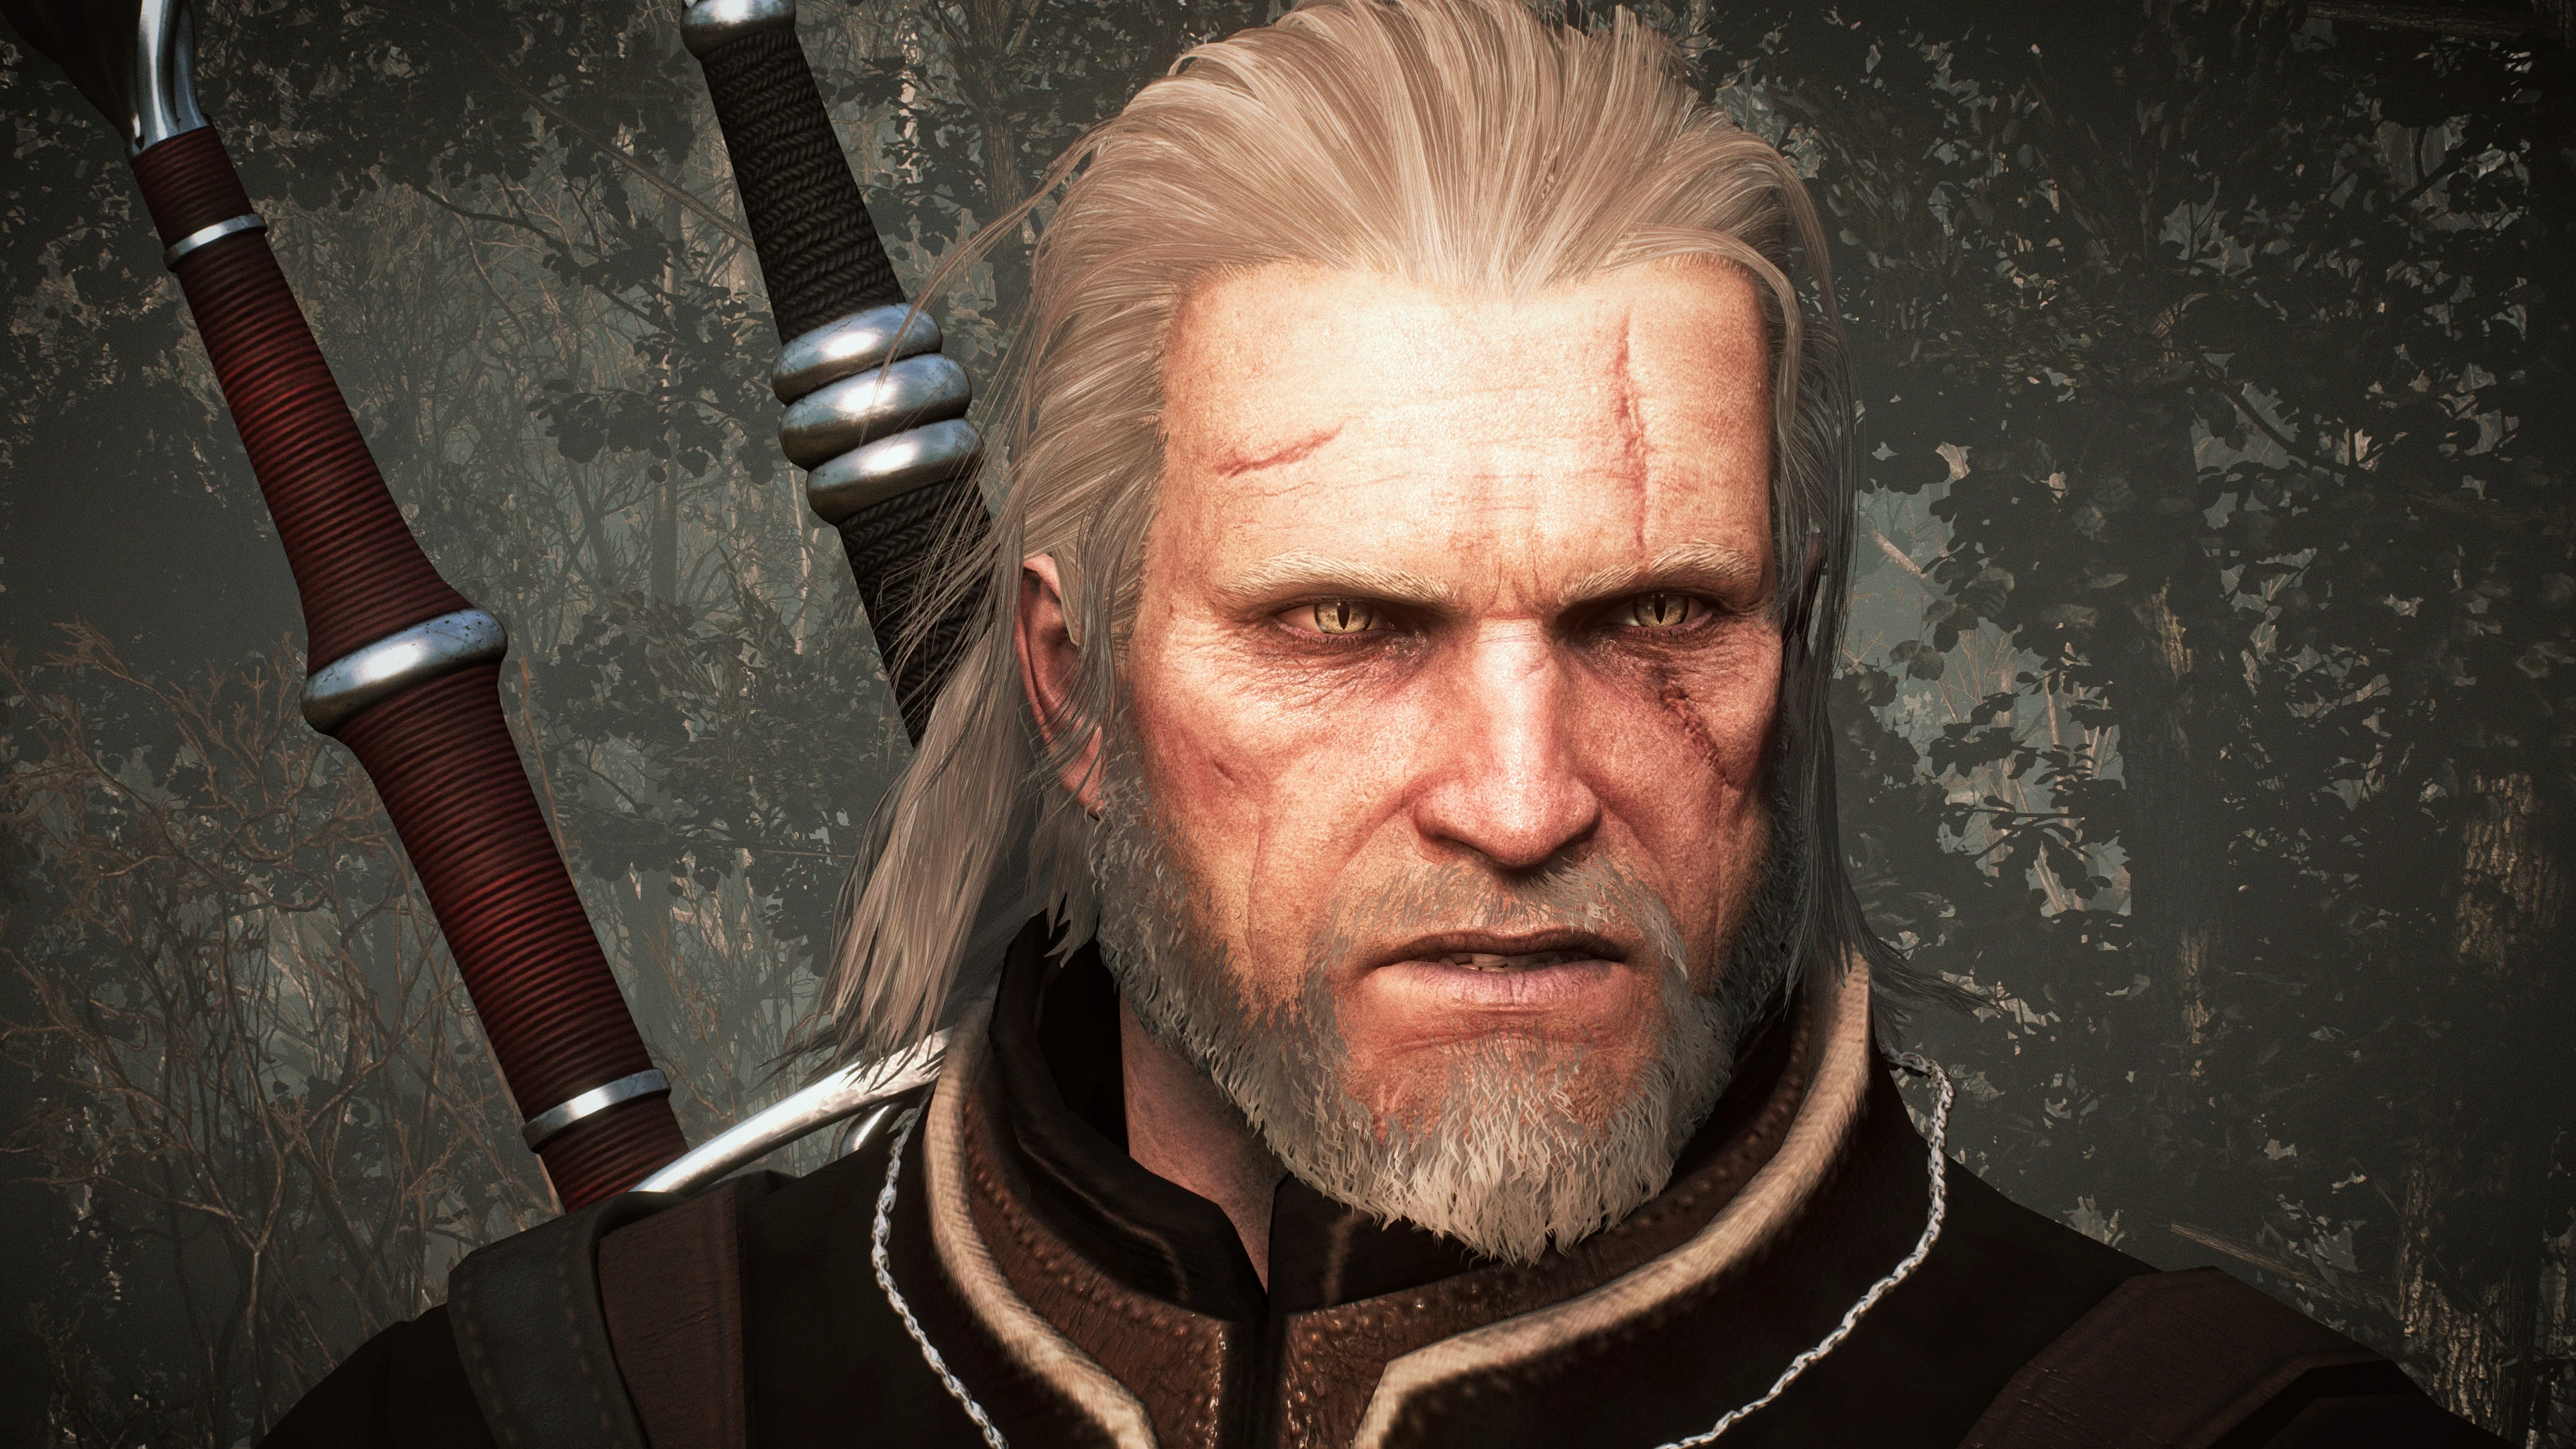 Top mods at The Witcher Nexus - mods and community